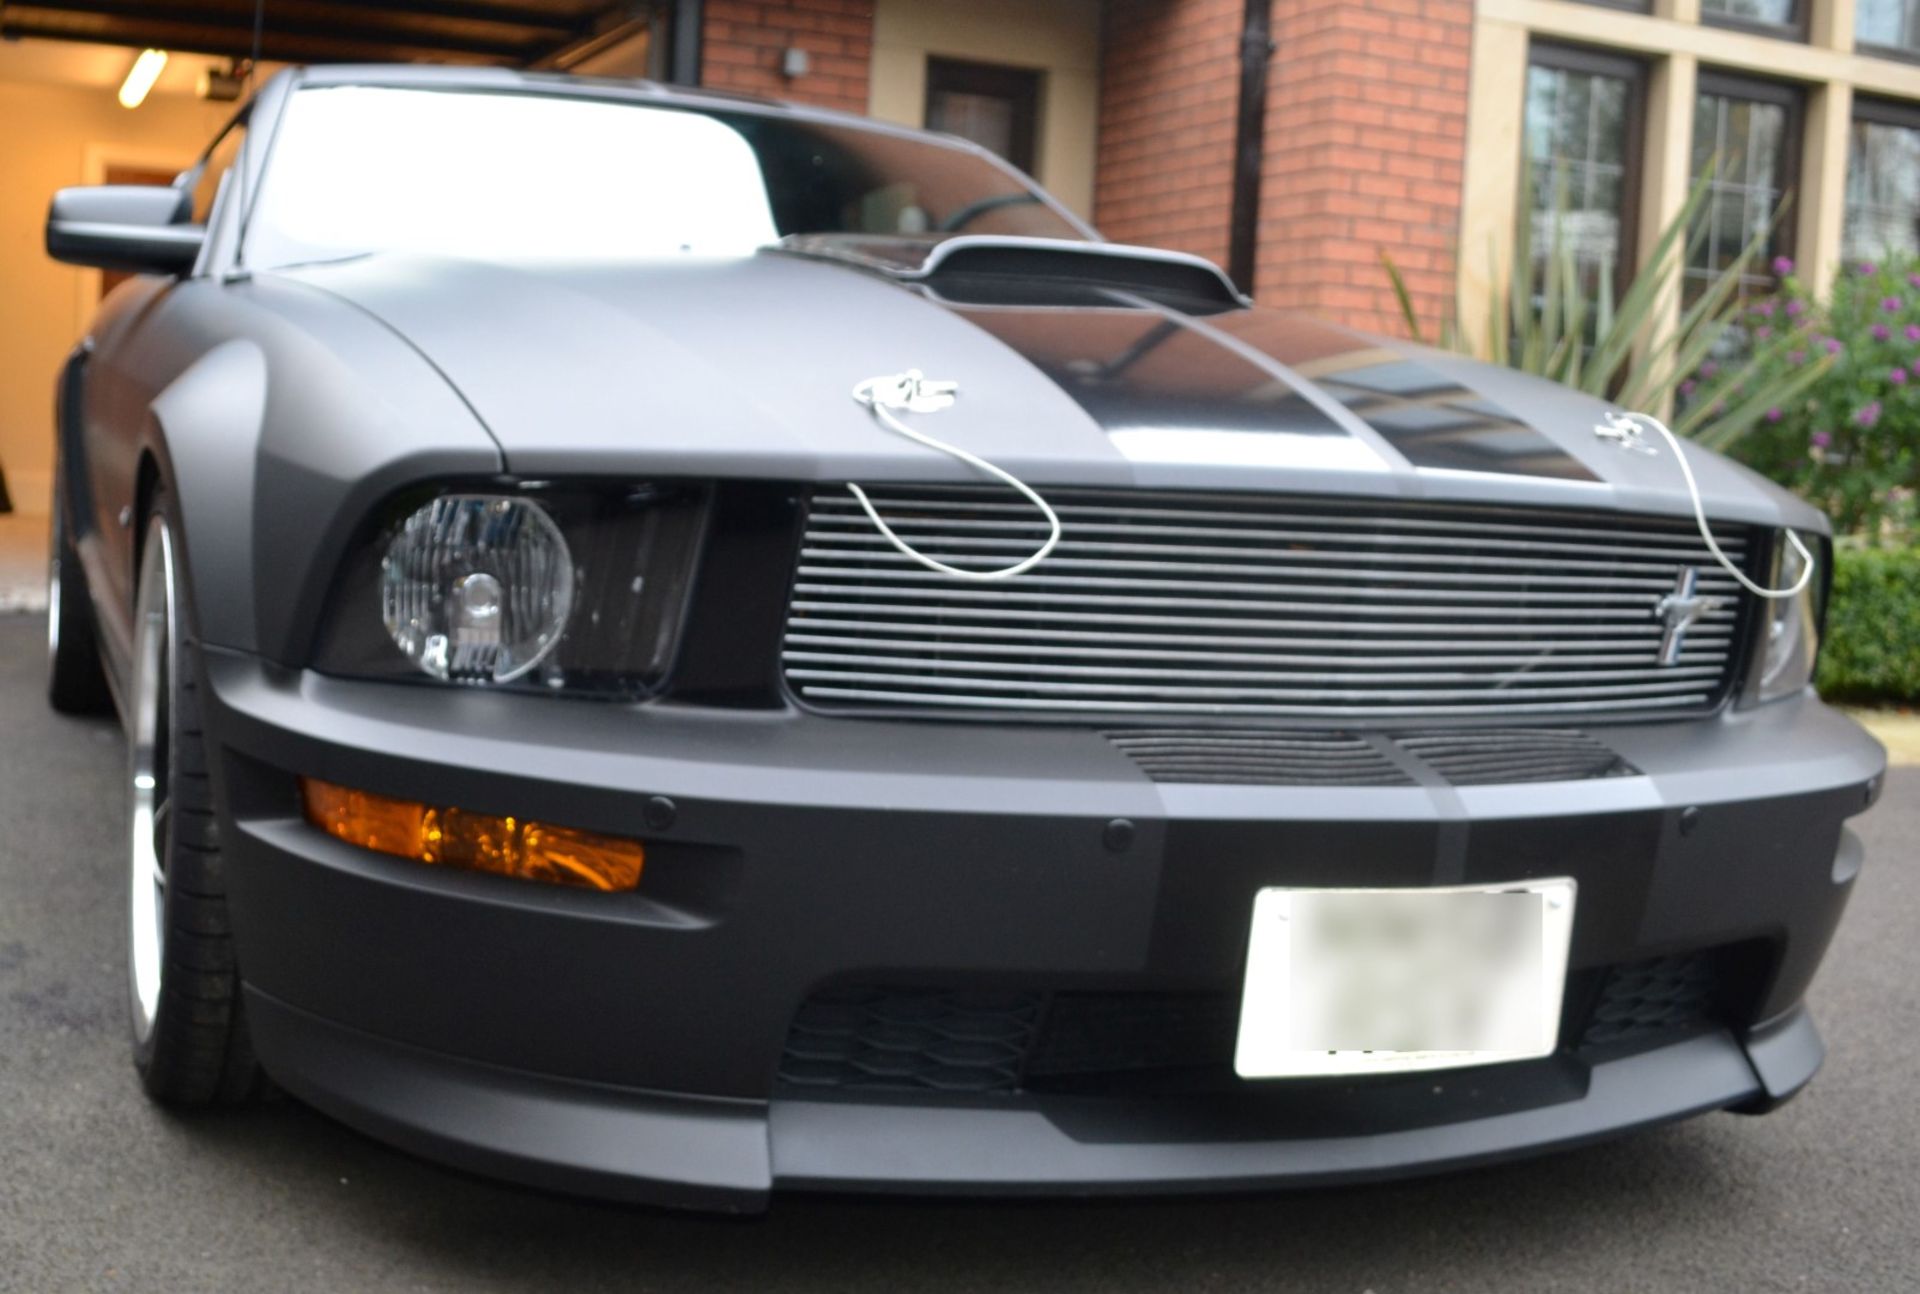 Limited Edition Supercharged 2008 Shelby Ford Mustang GT-C - 2136 Miles - No VAT on the hammer - Image 18 of 64